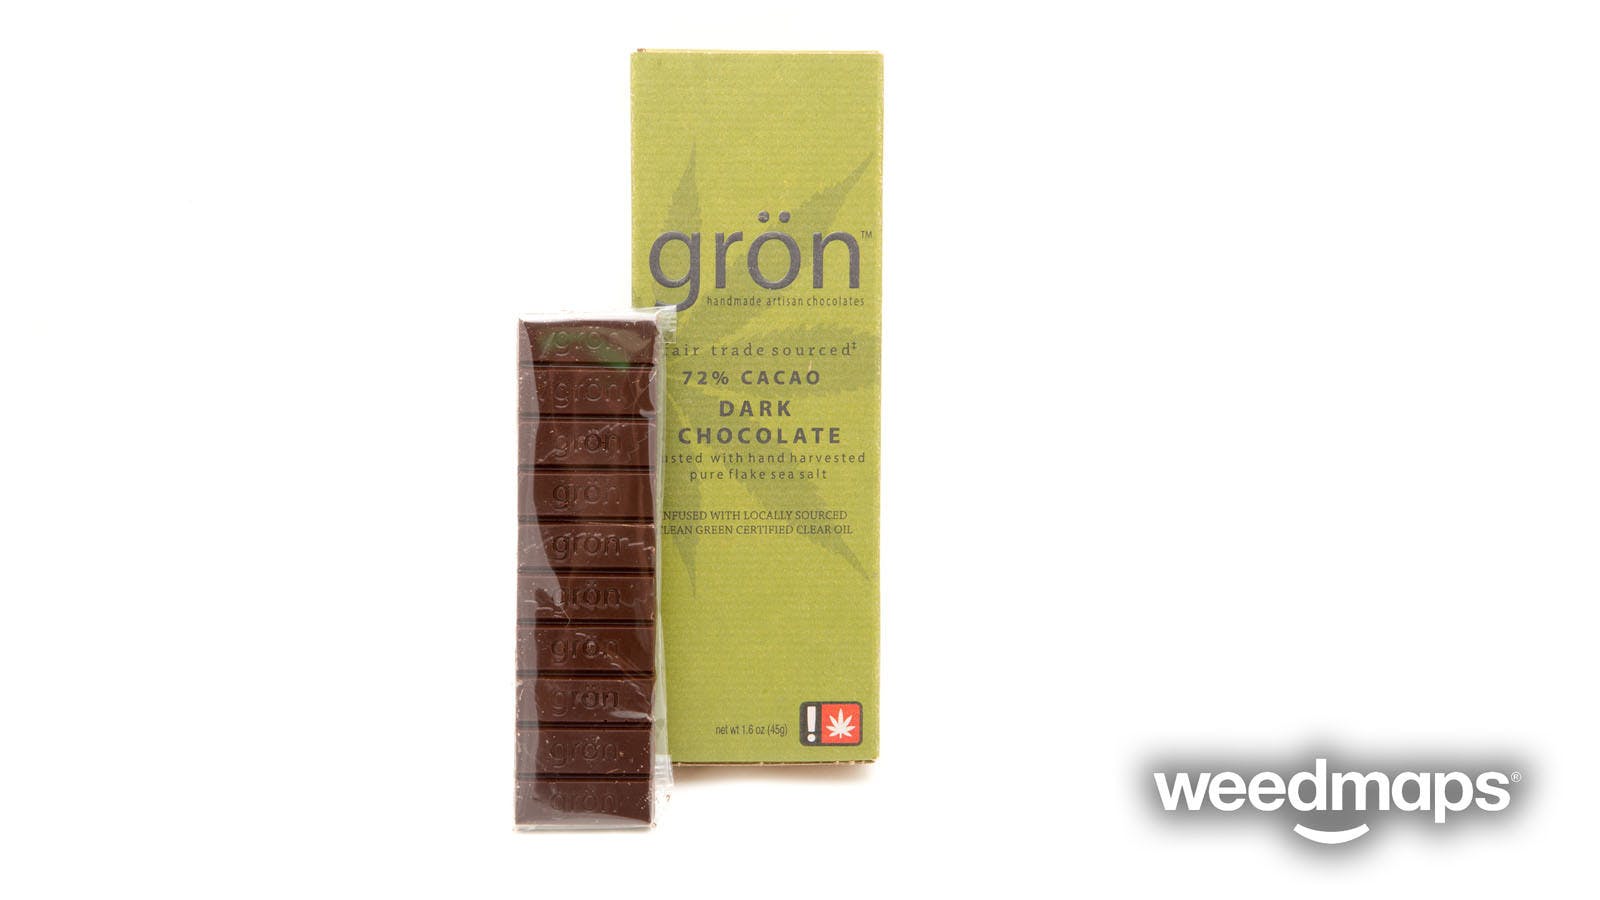 edible-gron-bar-dark-chocolate-with-locally-made-toffee